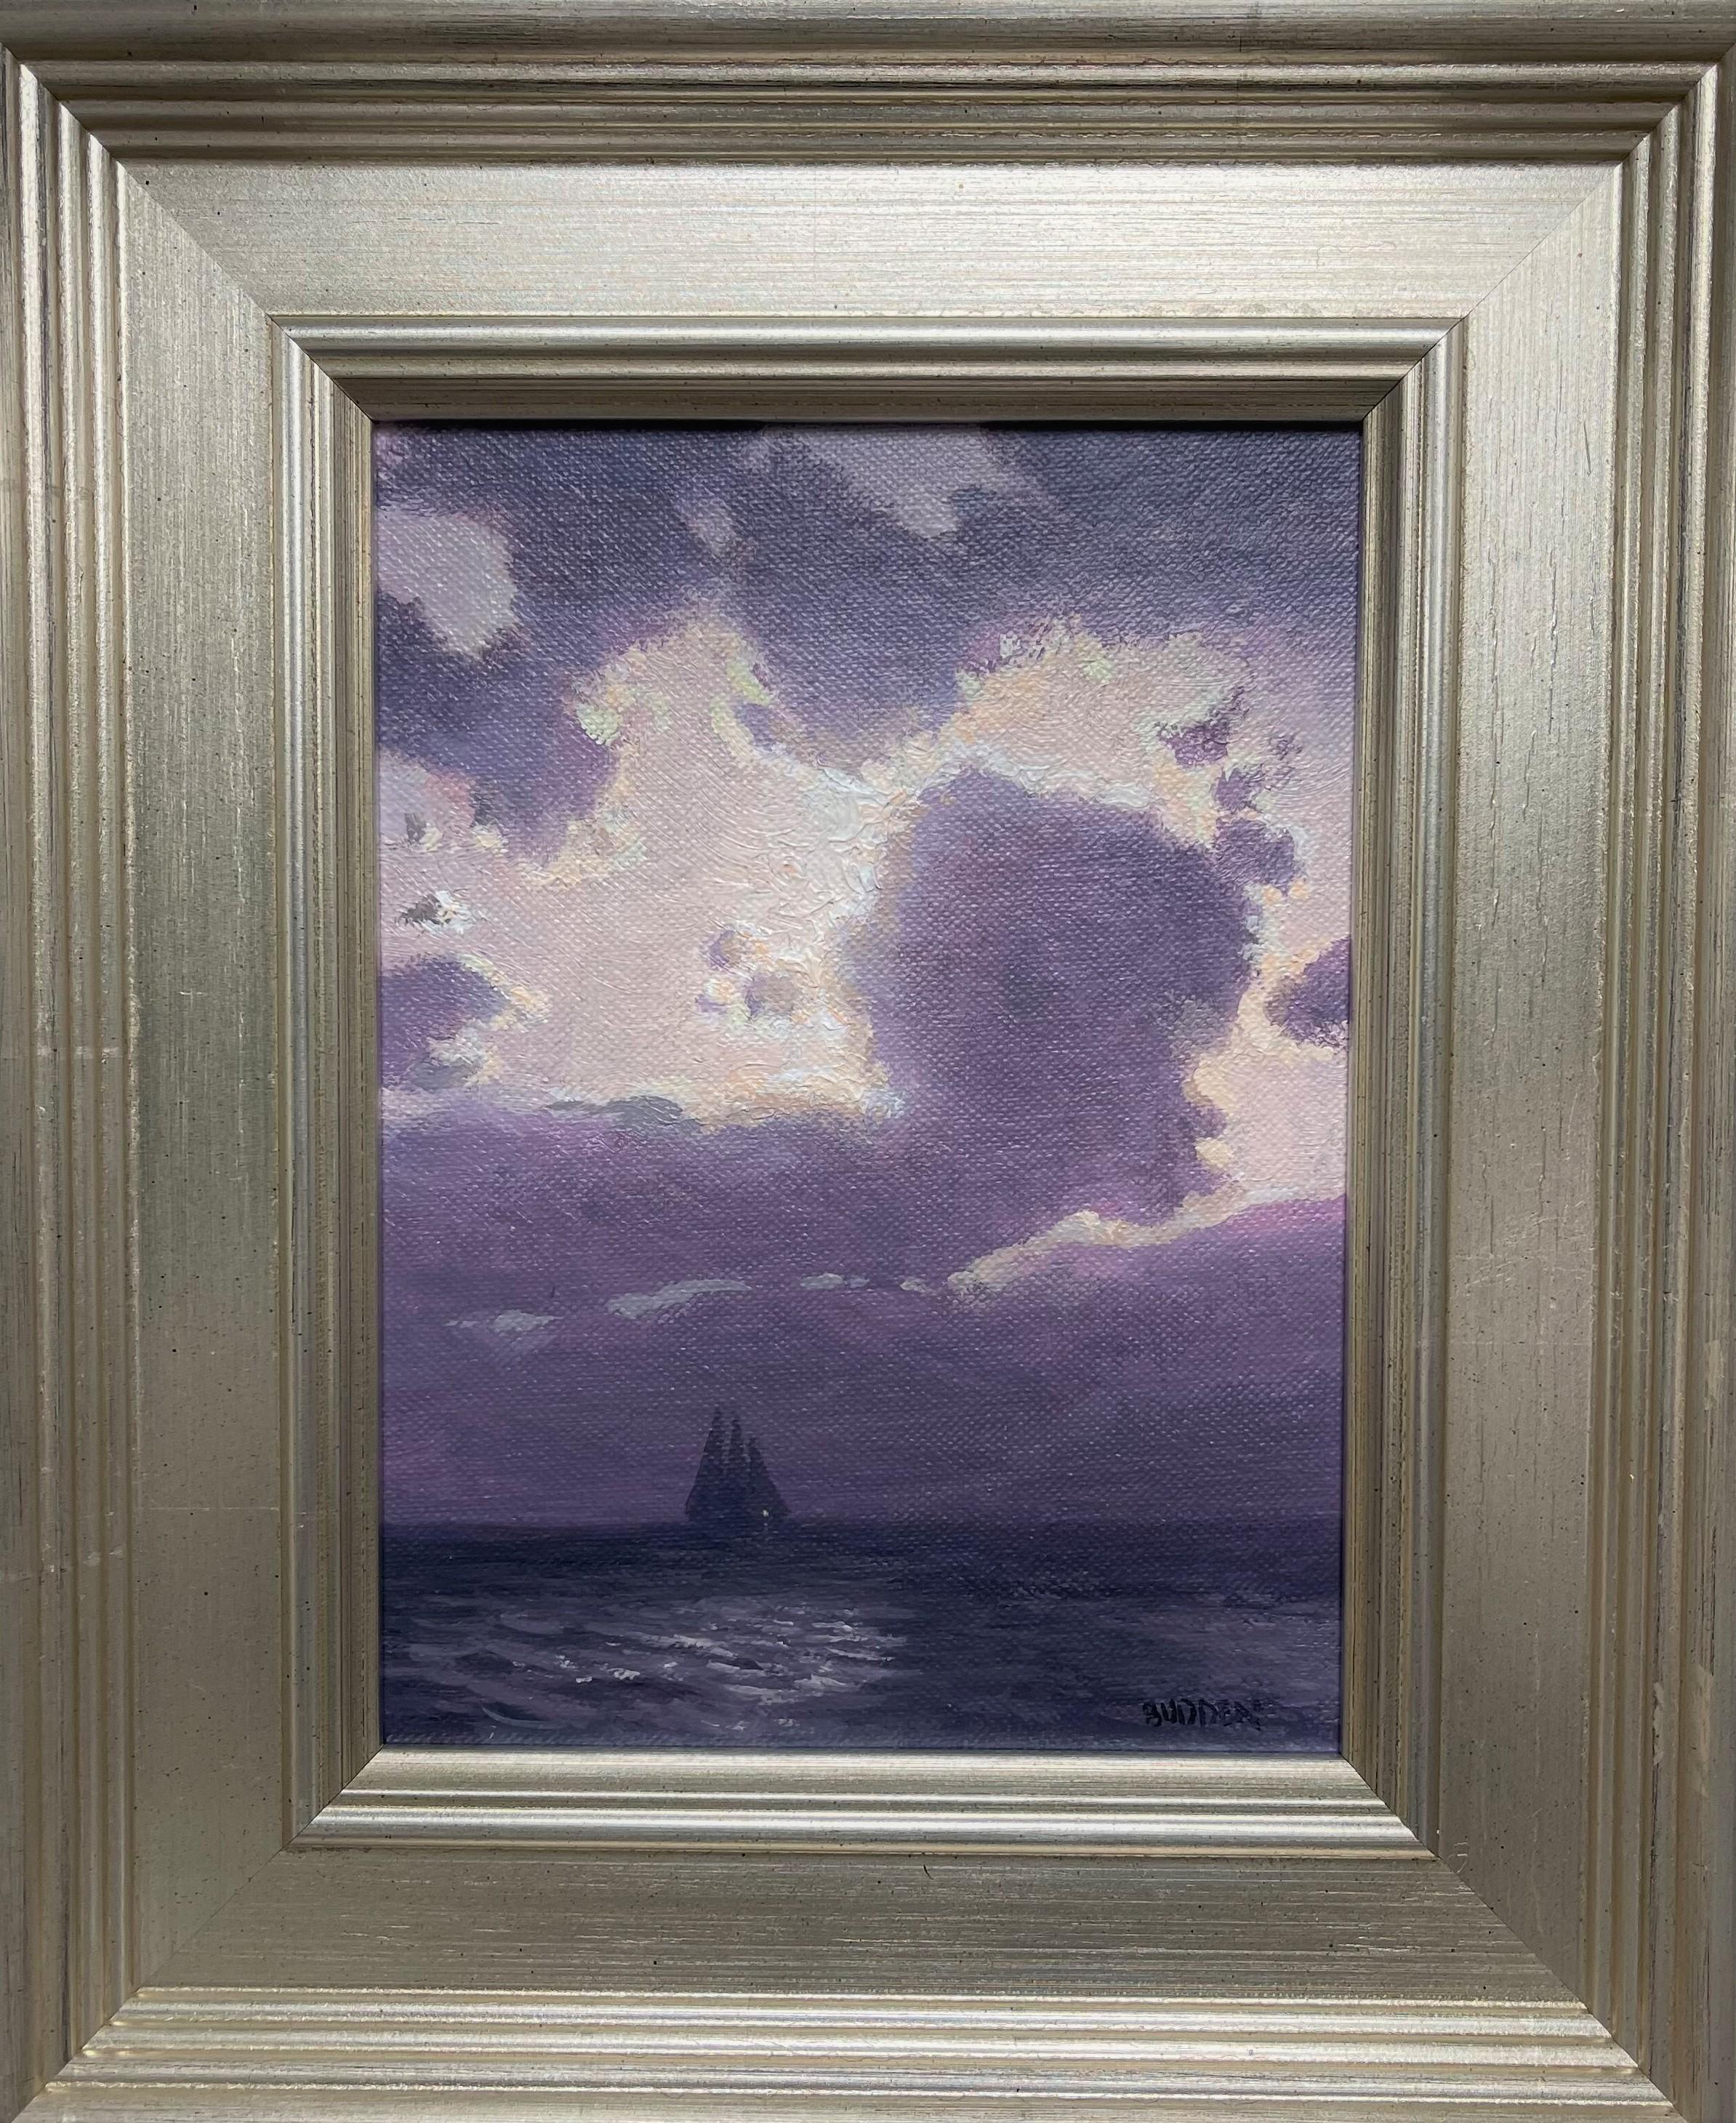  Moonrise  Sailing  oil/panel 6 x 8 image, 11.5 x 9.75 framed
 Moonrise Sailing is an oil painting on canvas panel by award winning contemporary artist Michael Budden that showcases a uniquely beautiful moonlit view of the ocean. This painting is